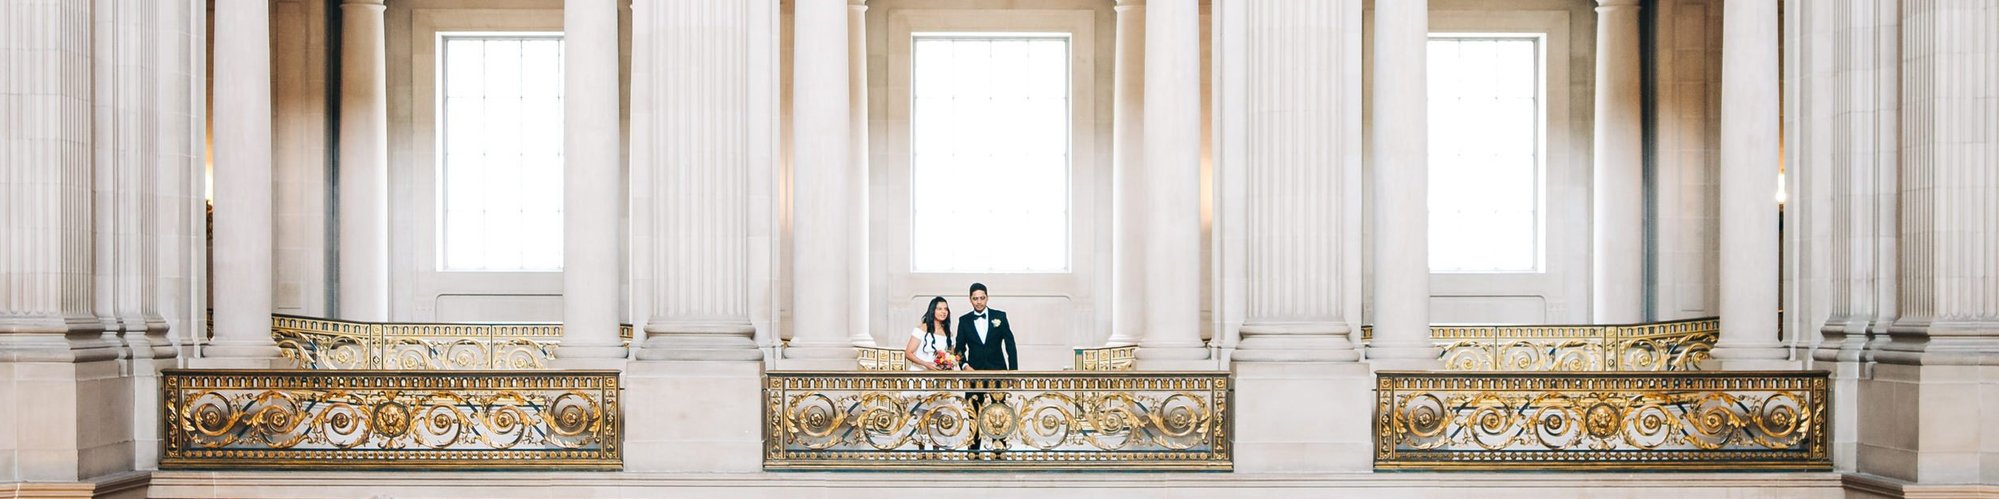 Dwarfed by the grand architecture of San Francisco City Hall, a bride and groom look out across the space from a columned balcony